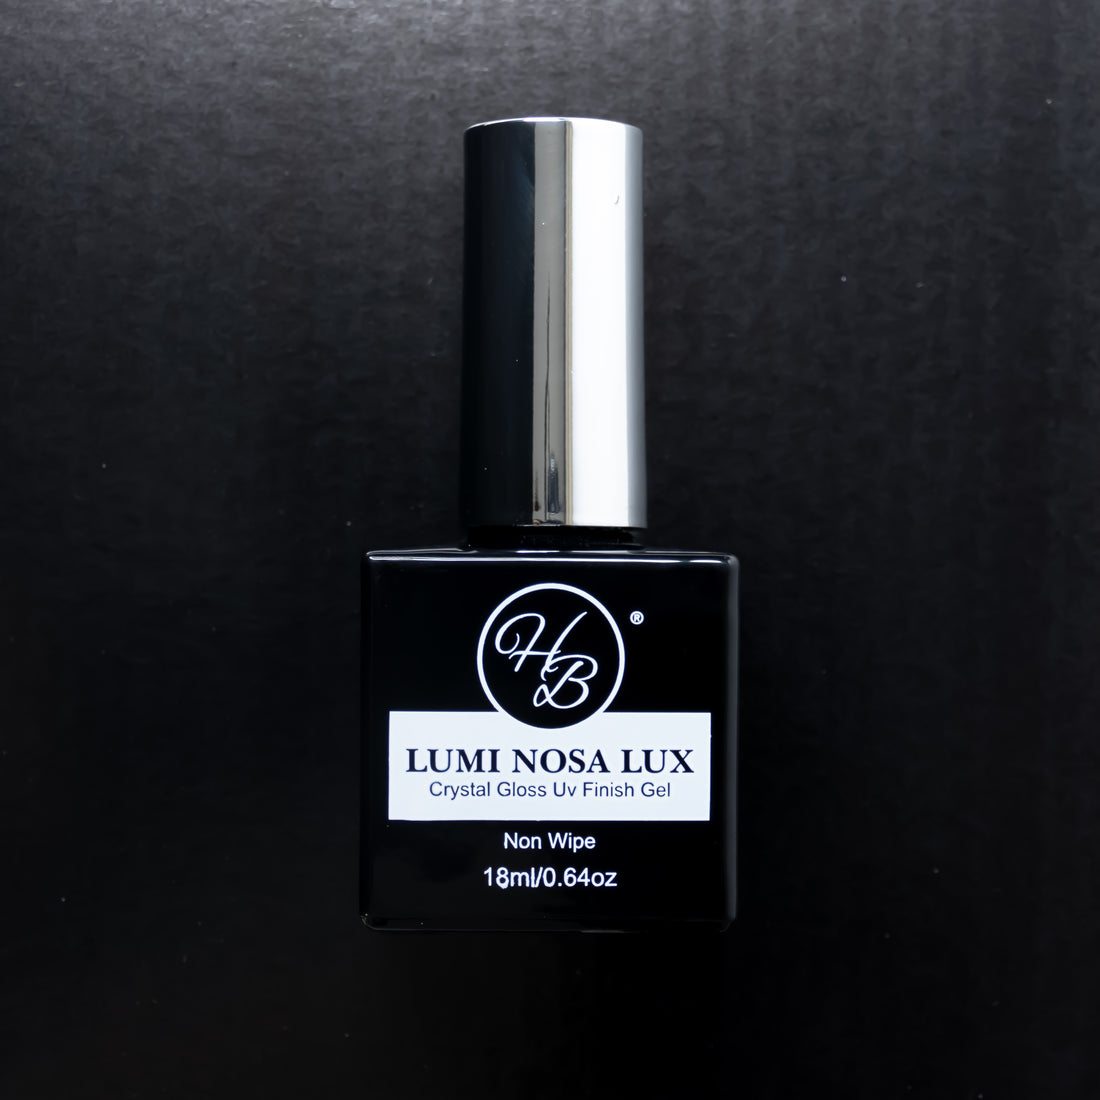 Lumi Nosa Lux | Nail High Gloss UV Finish Gel | For Acrylic and Gel